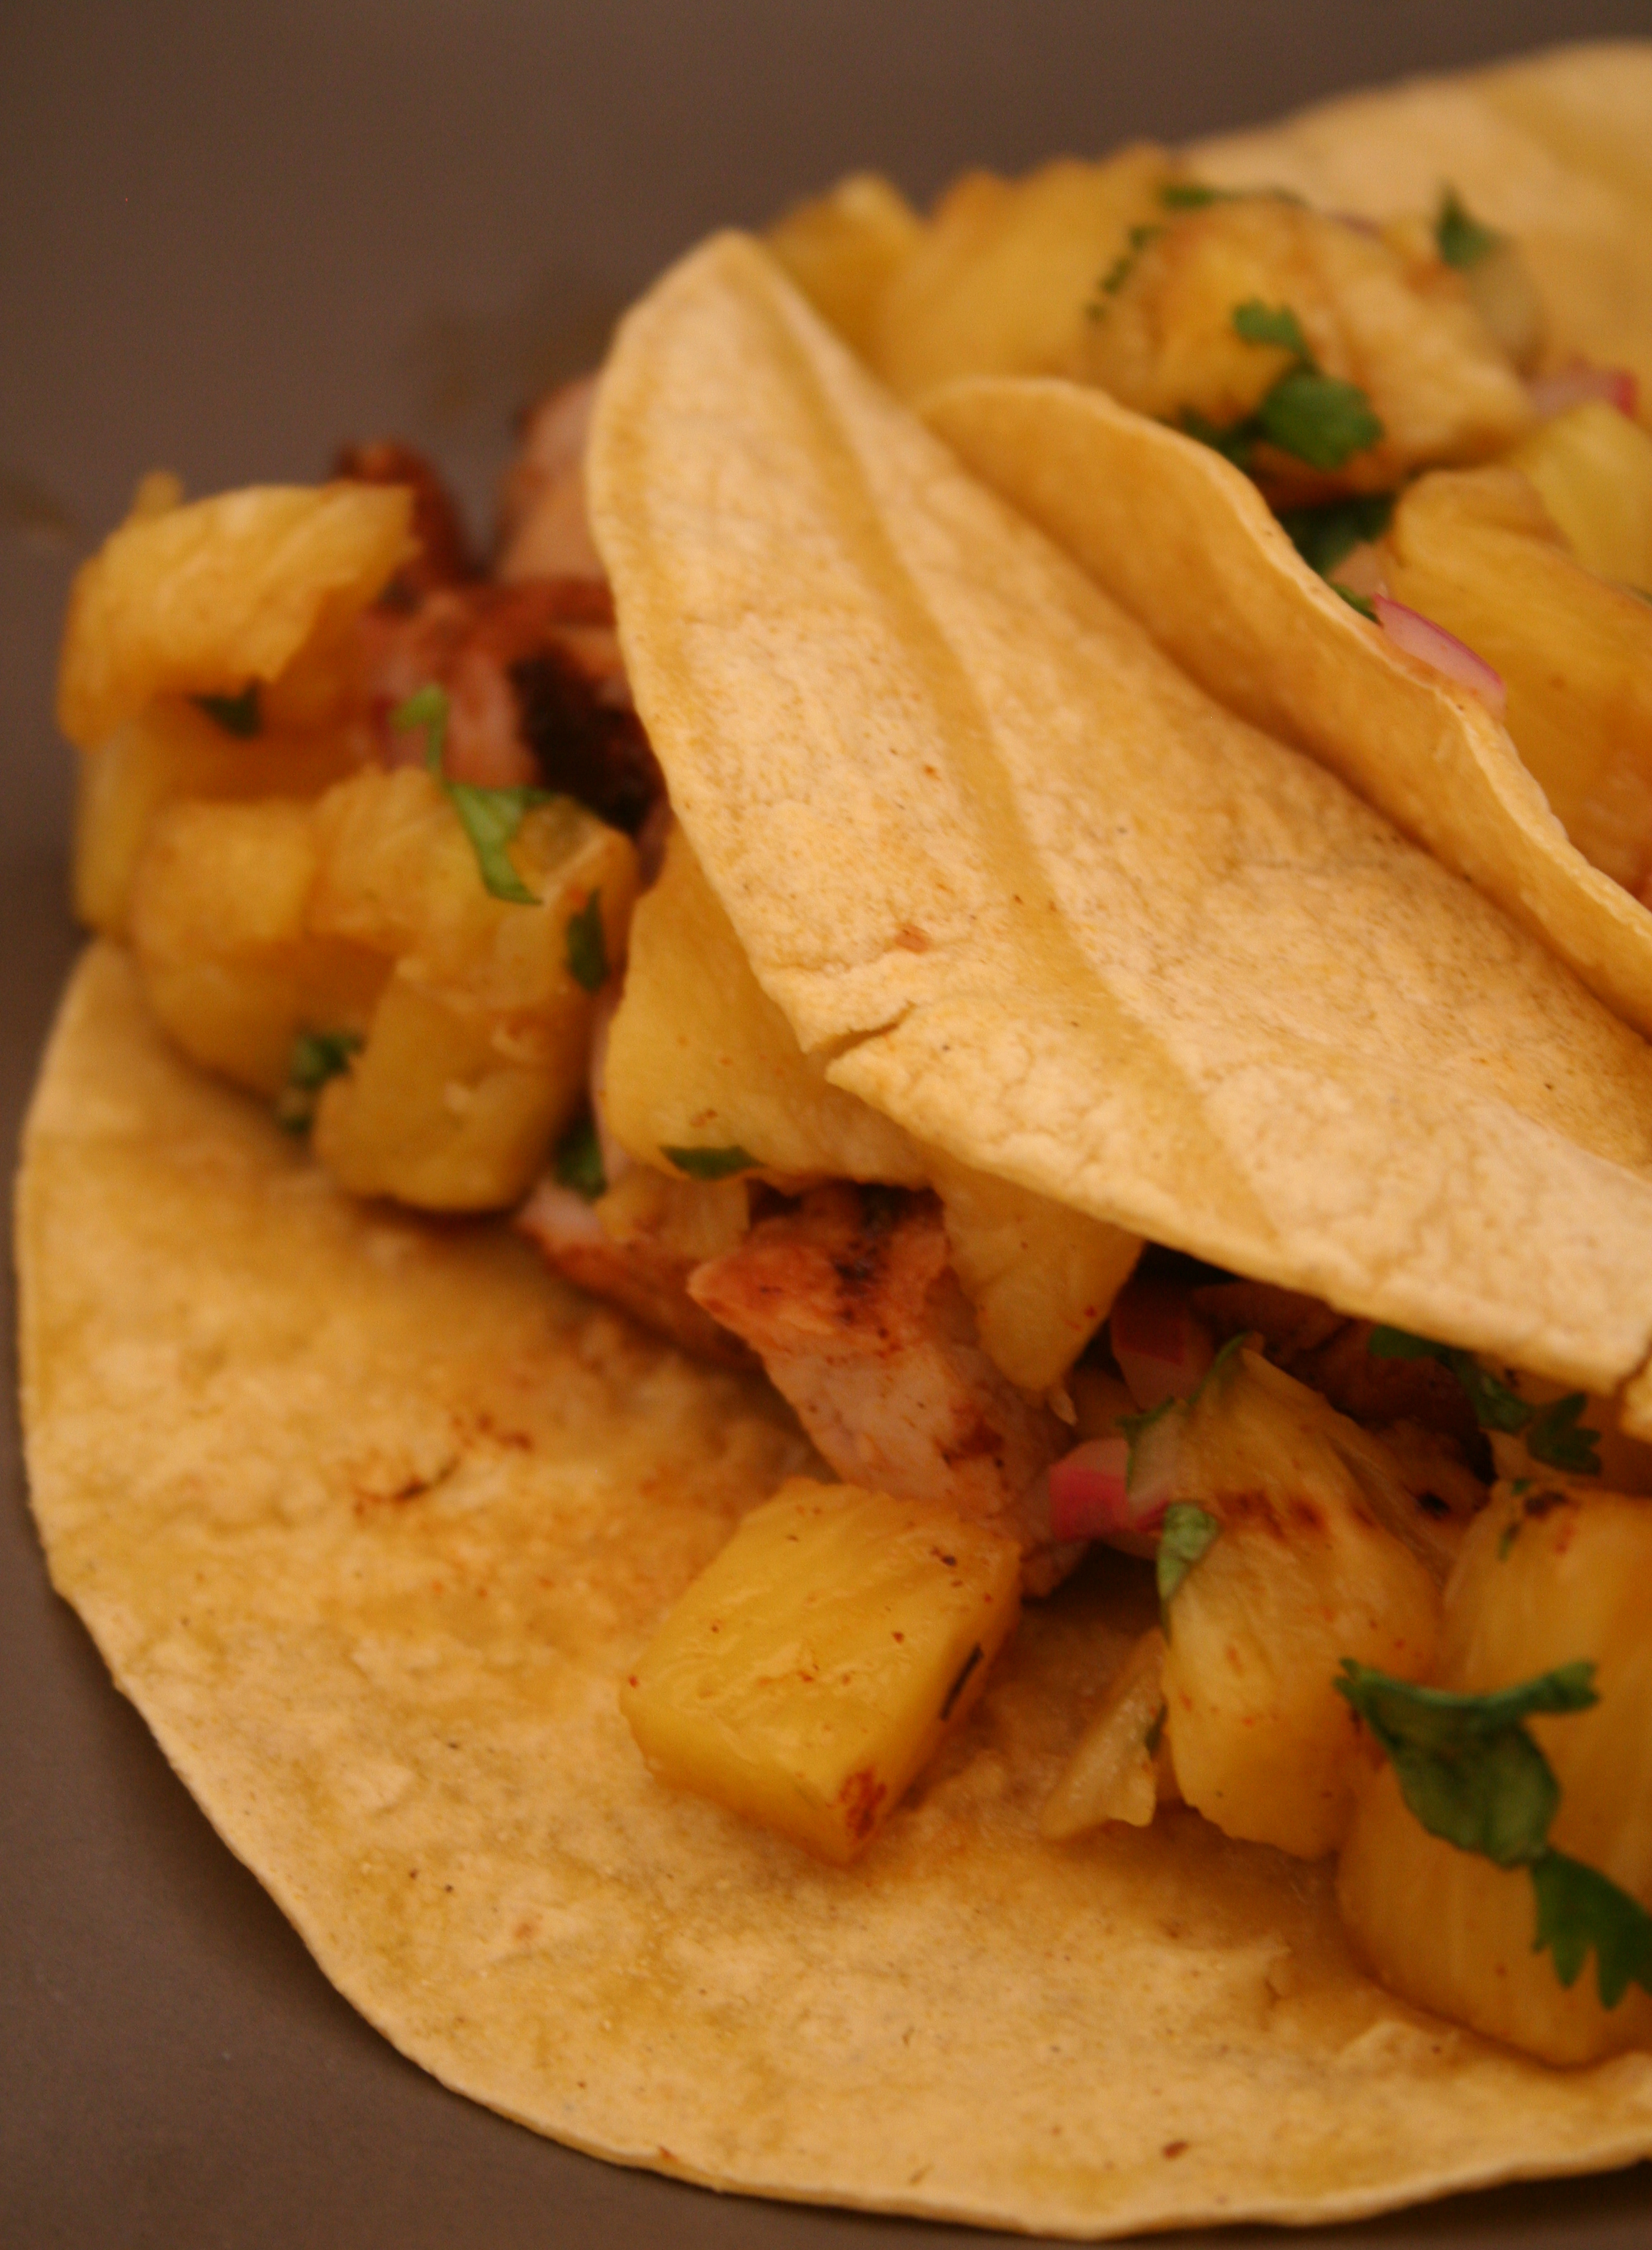 Chipotle Pork Tacos with Grilled Pineapple Salsa